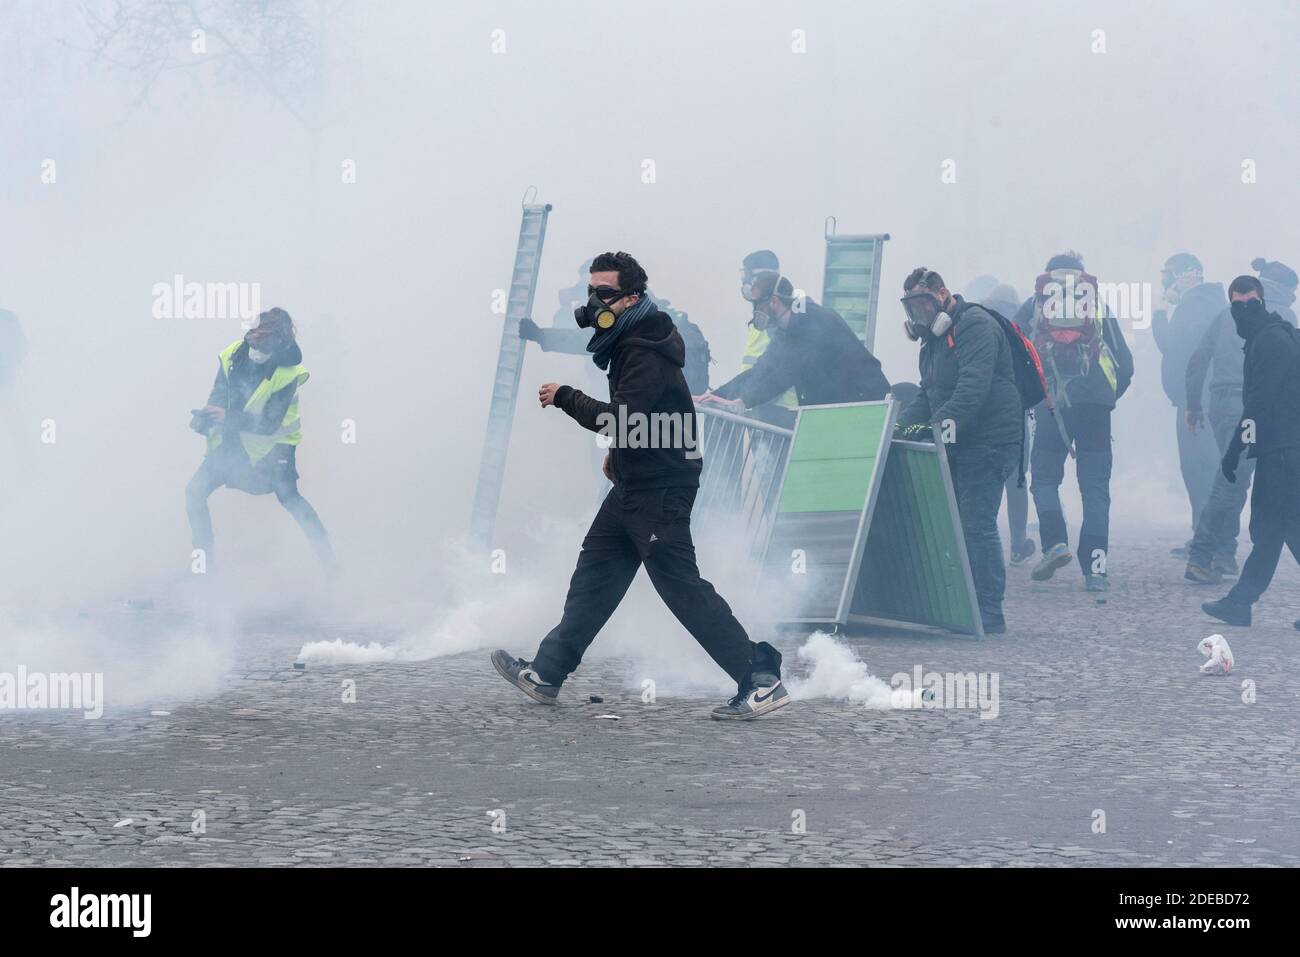 To celebrate the 4 months of mobilization of the Gilets Jaunes (Yellow  Vests) movement and the end of the Great National Debate, protesters were  called to demonstrate on the Champs-Elysées. Clashes quickly